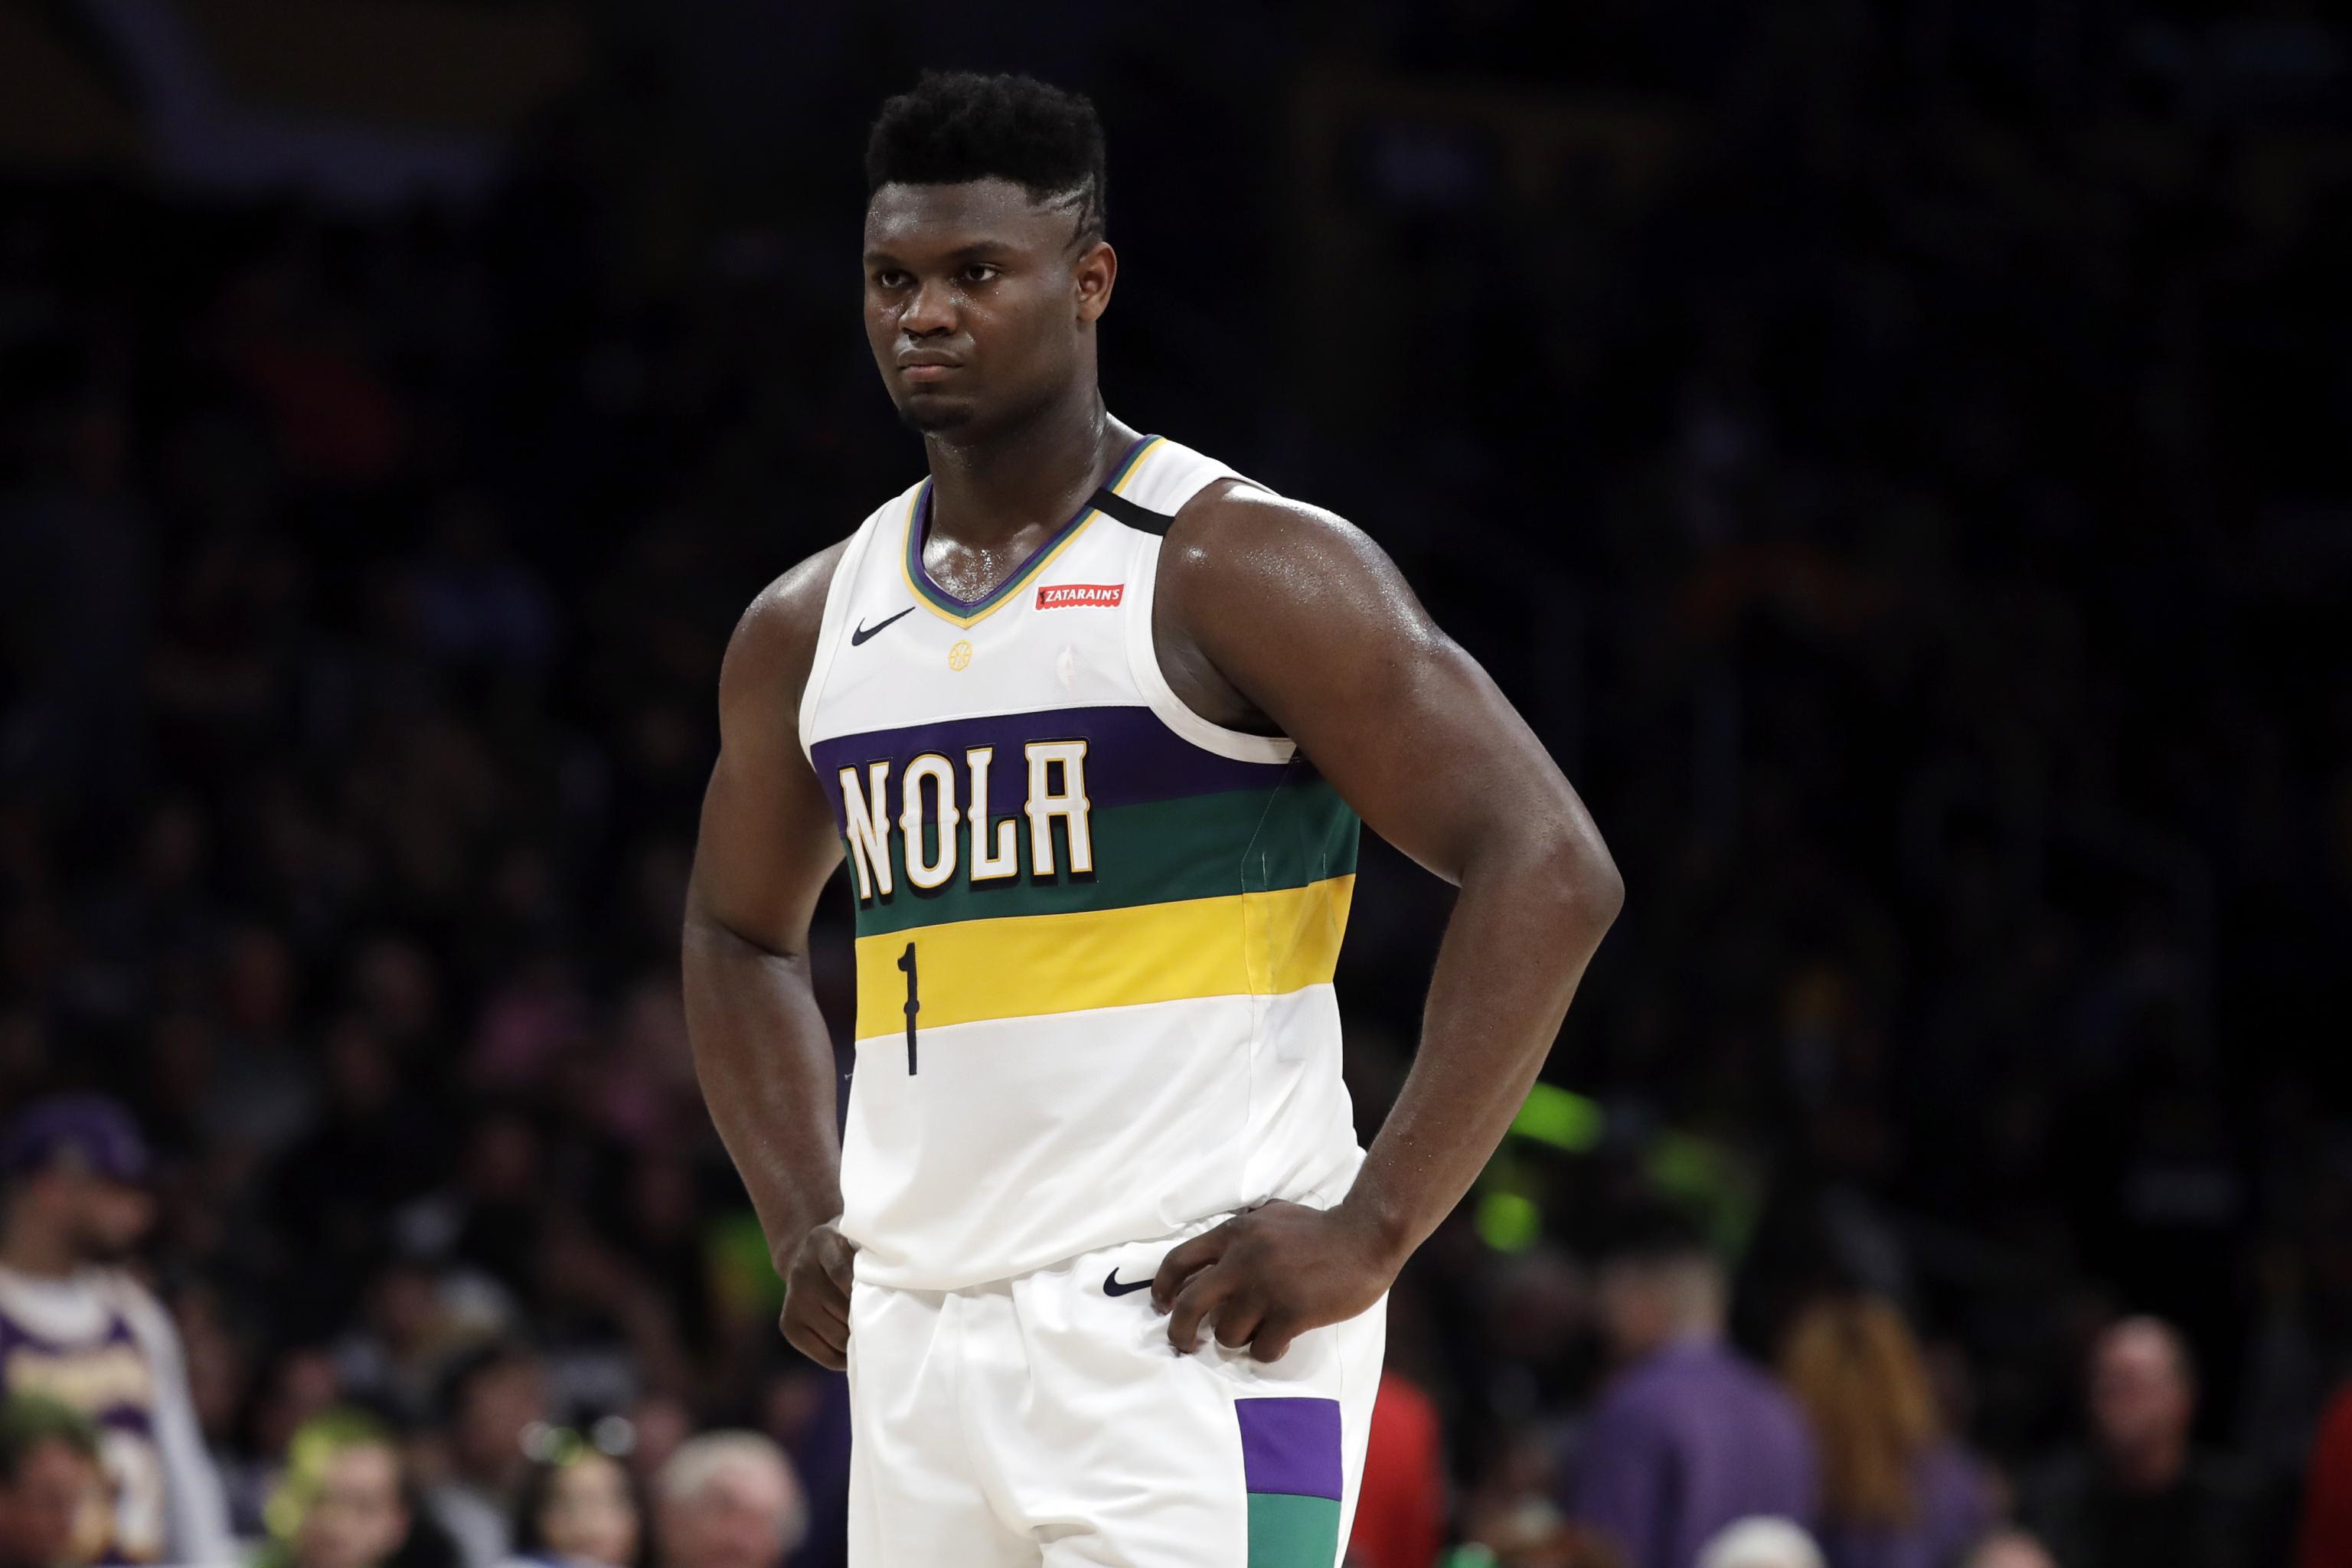 NBA permitted Pelicans to rehab Zion, Williams at practice